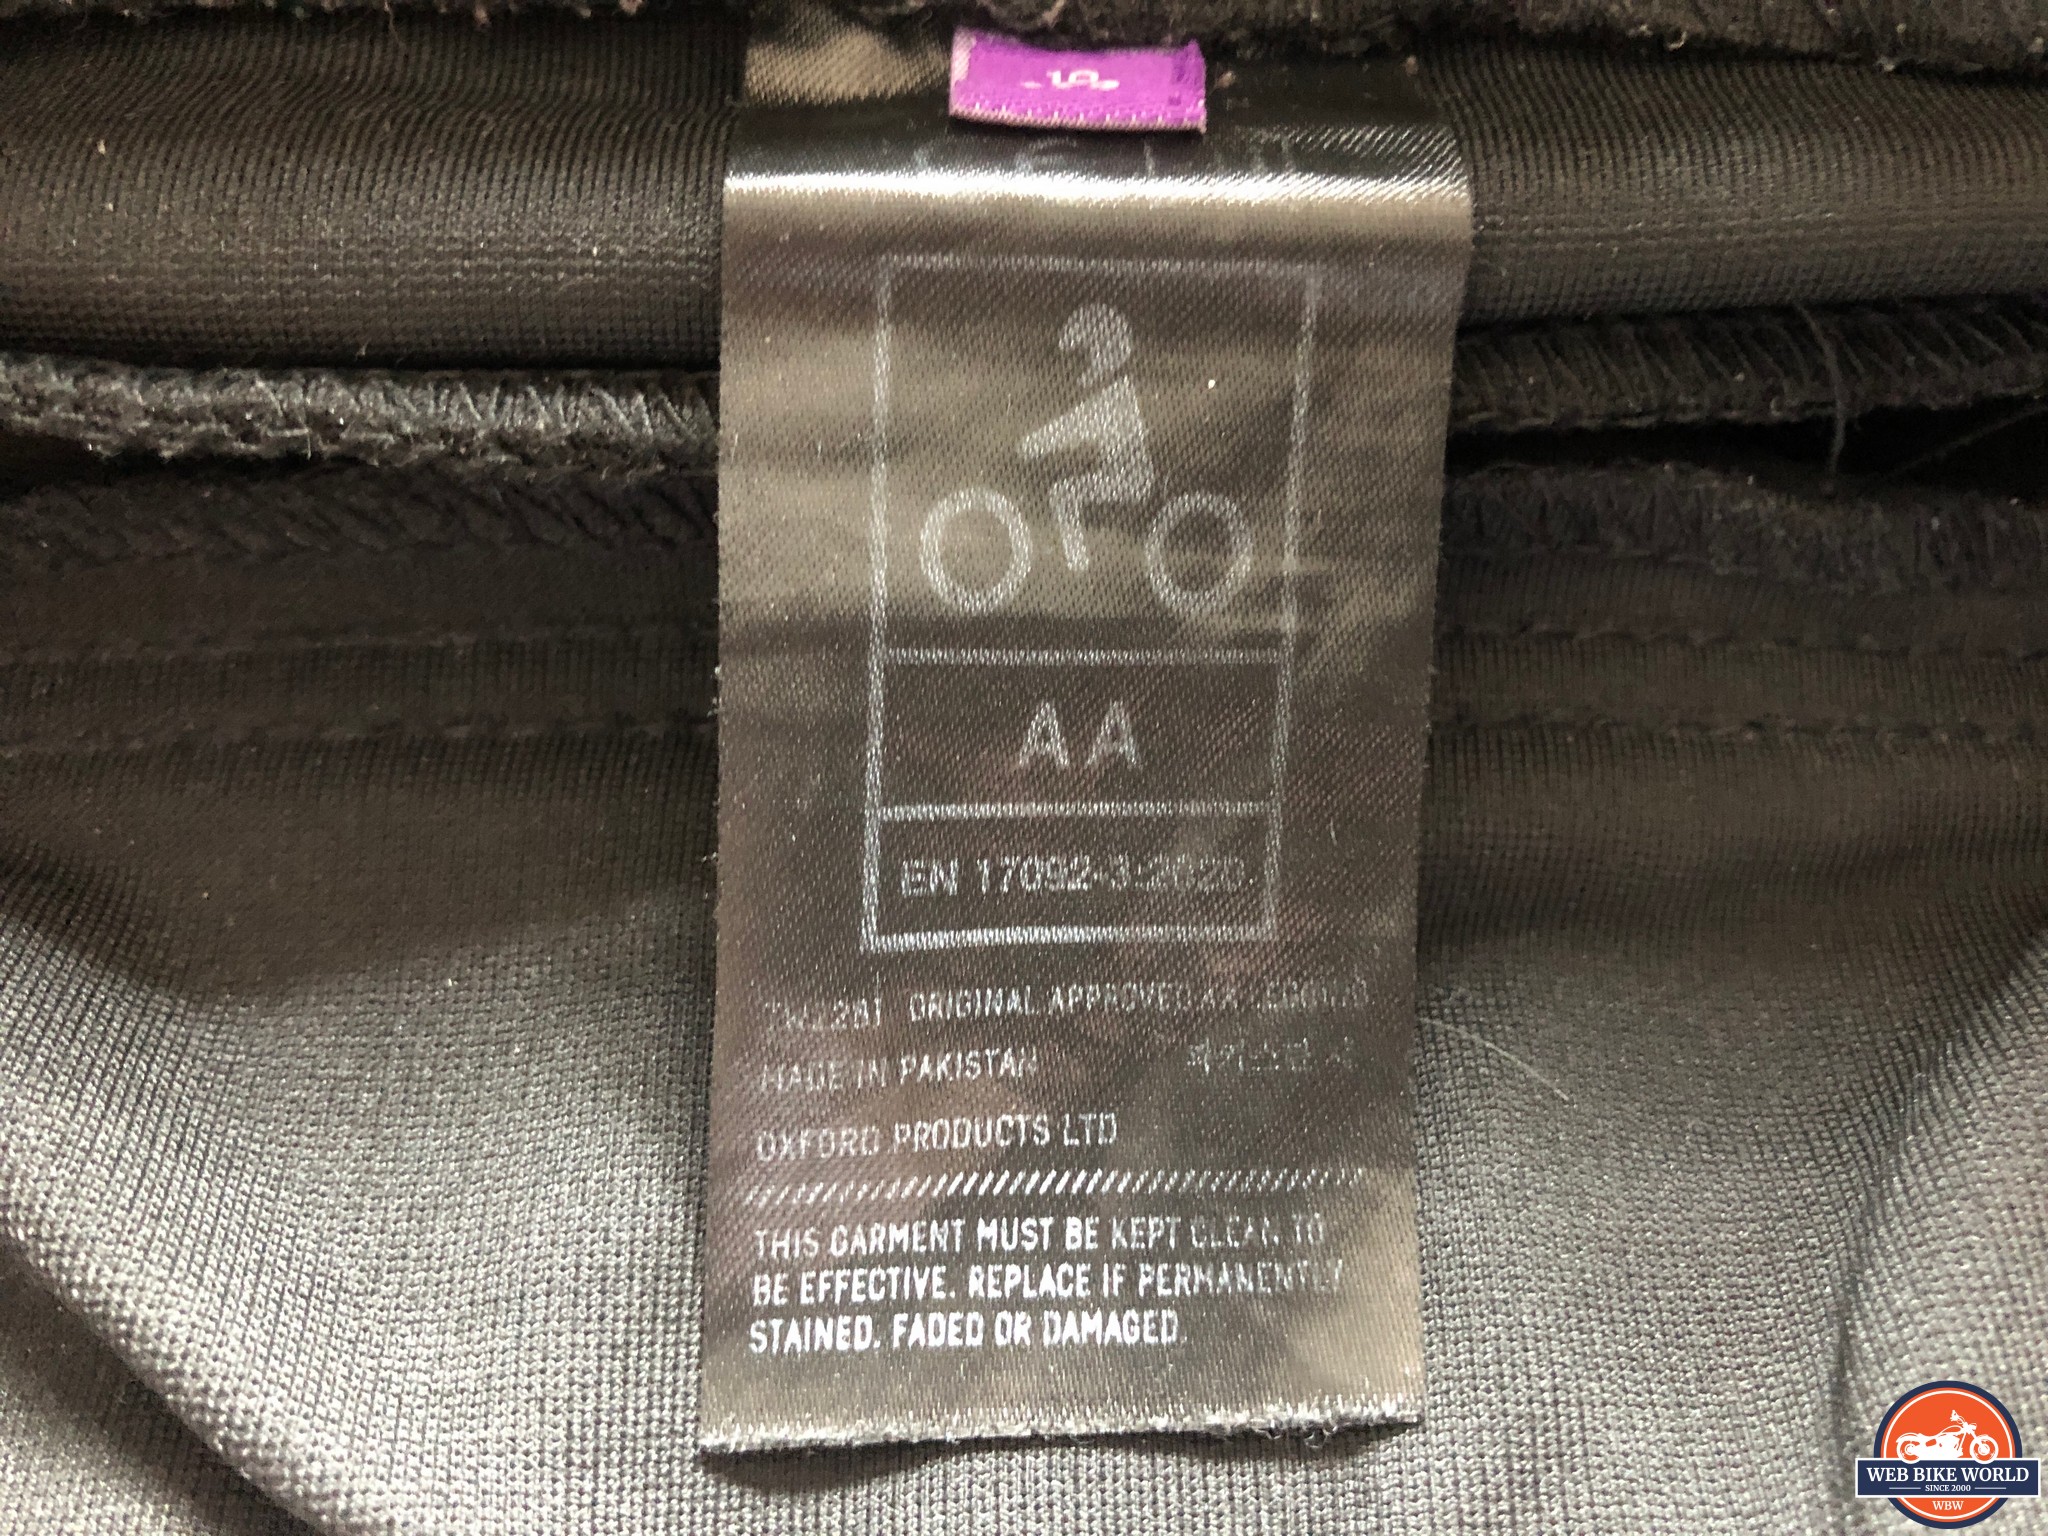 Oxford Original Approved AA Women's Leggings Review 